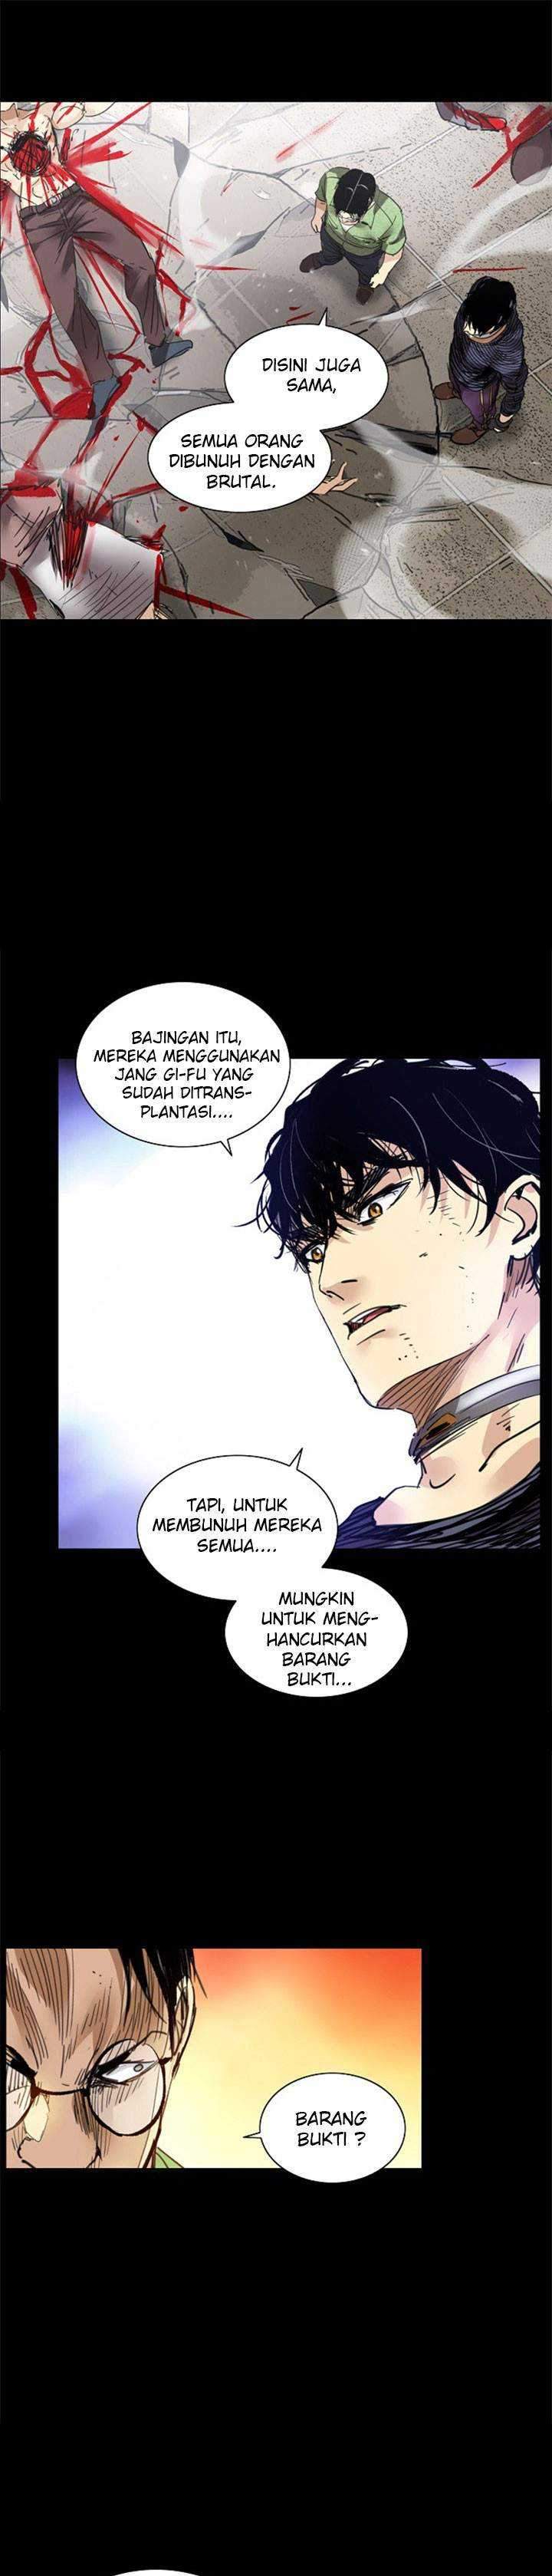 Fighters Chapter 72